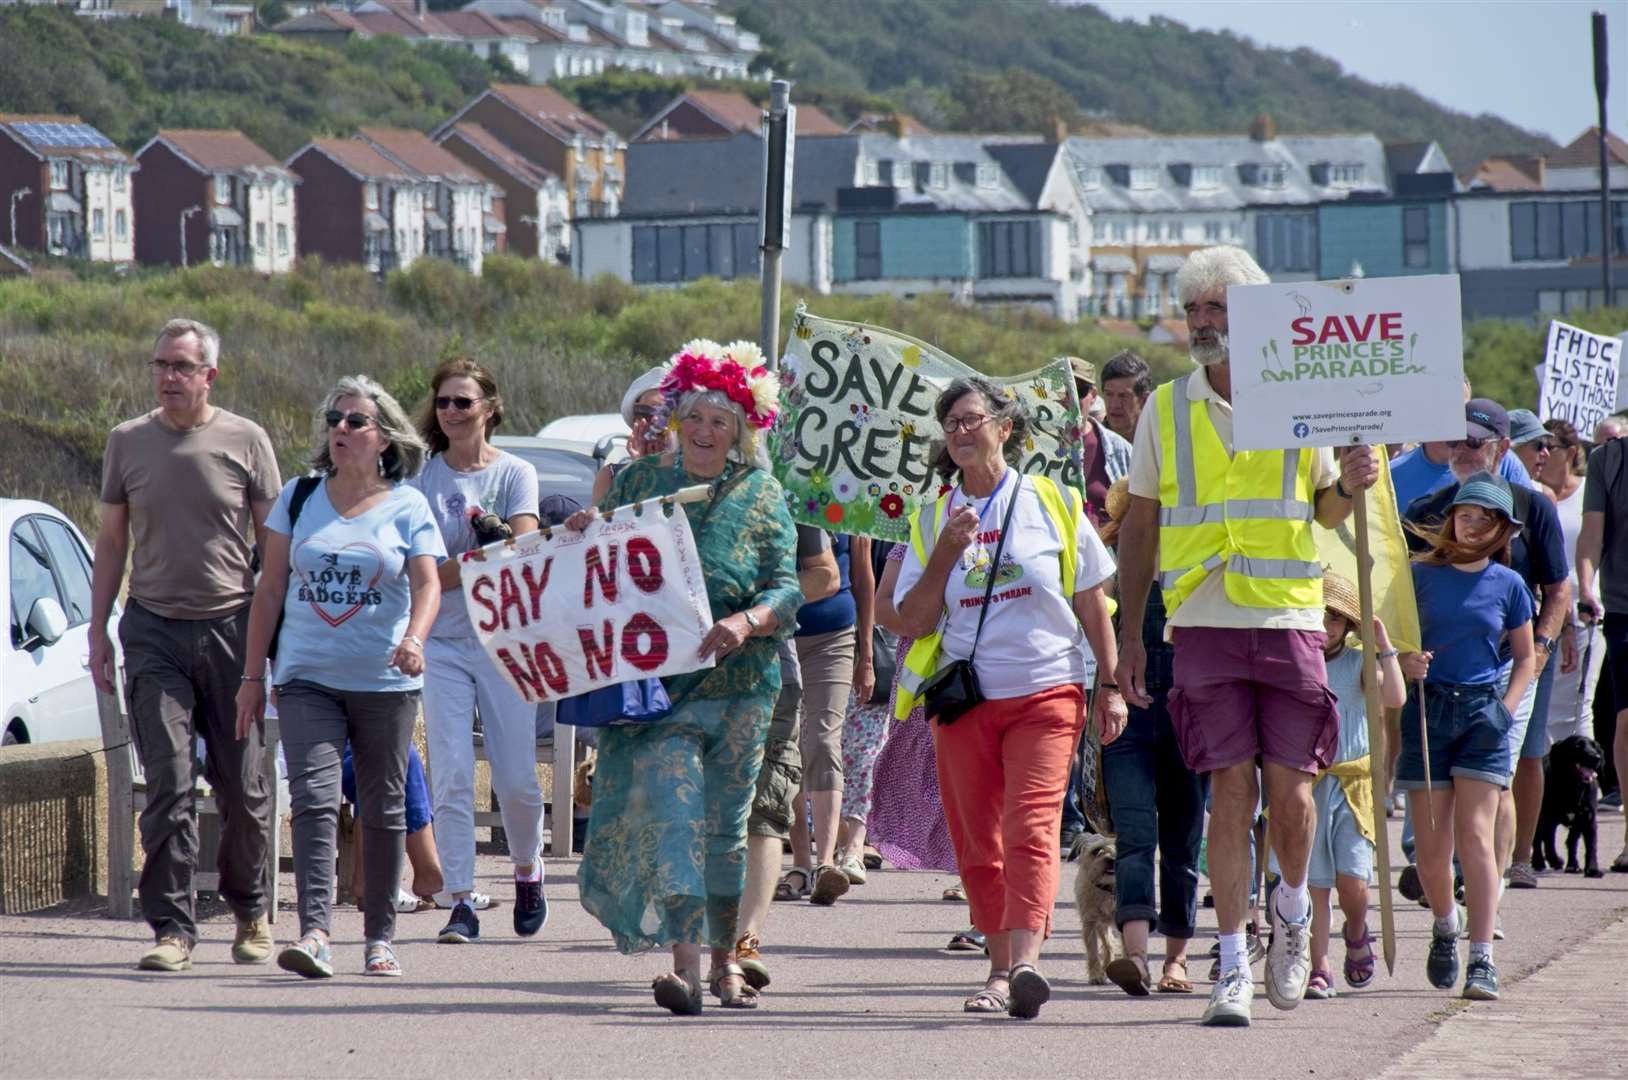 Previous protest at Princes Parade in August. Photo: James Willmott